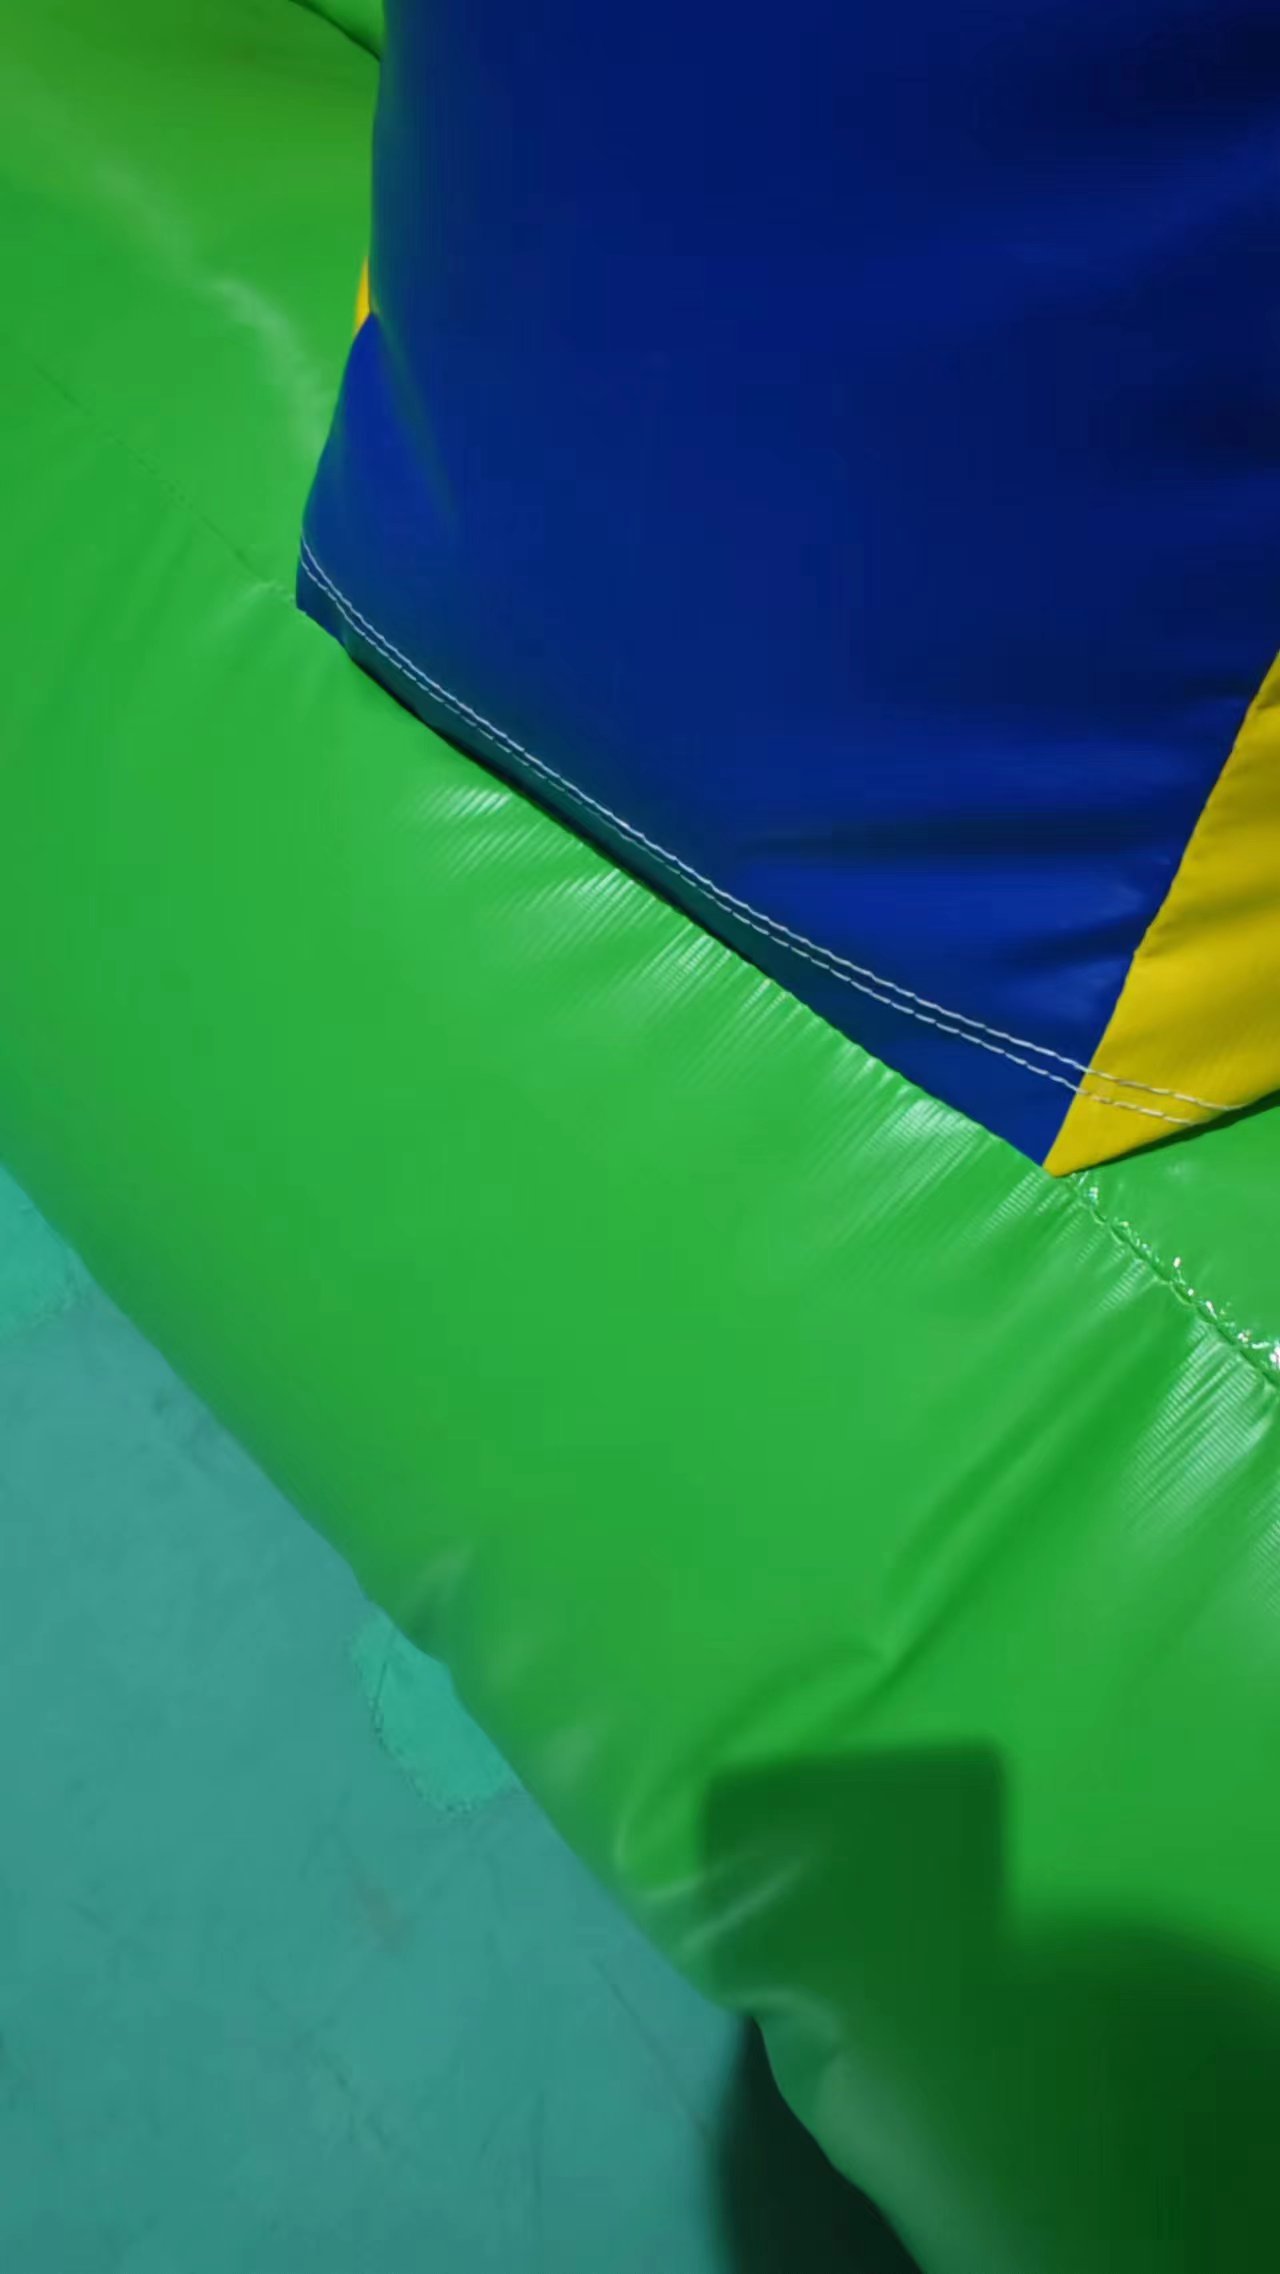 bounce house with slide